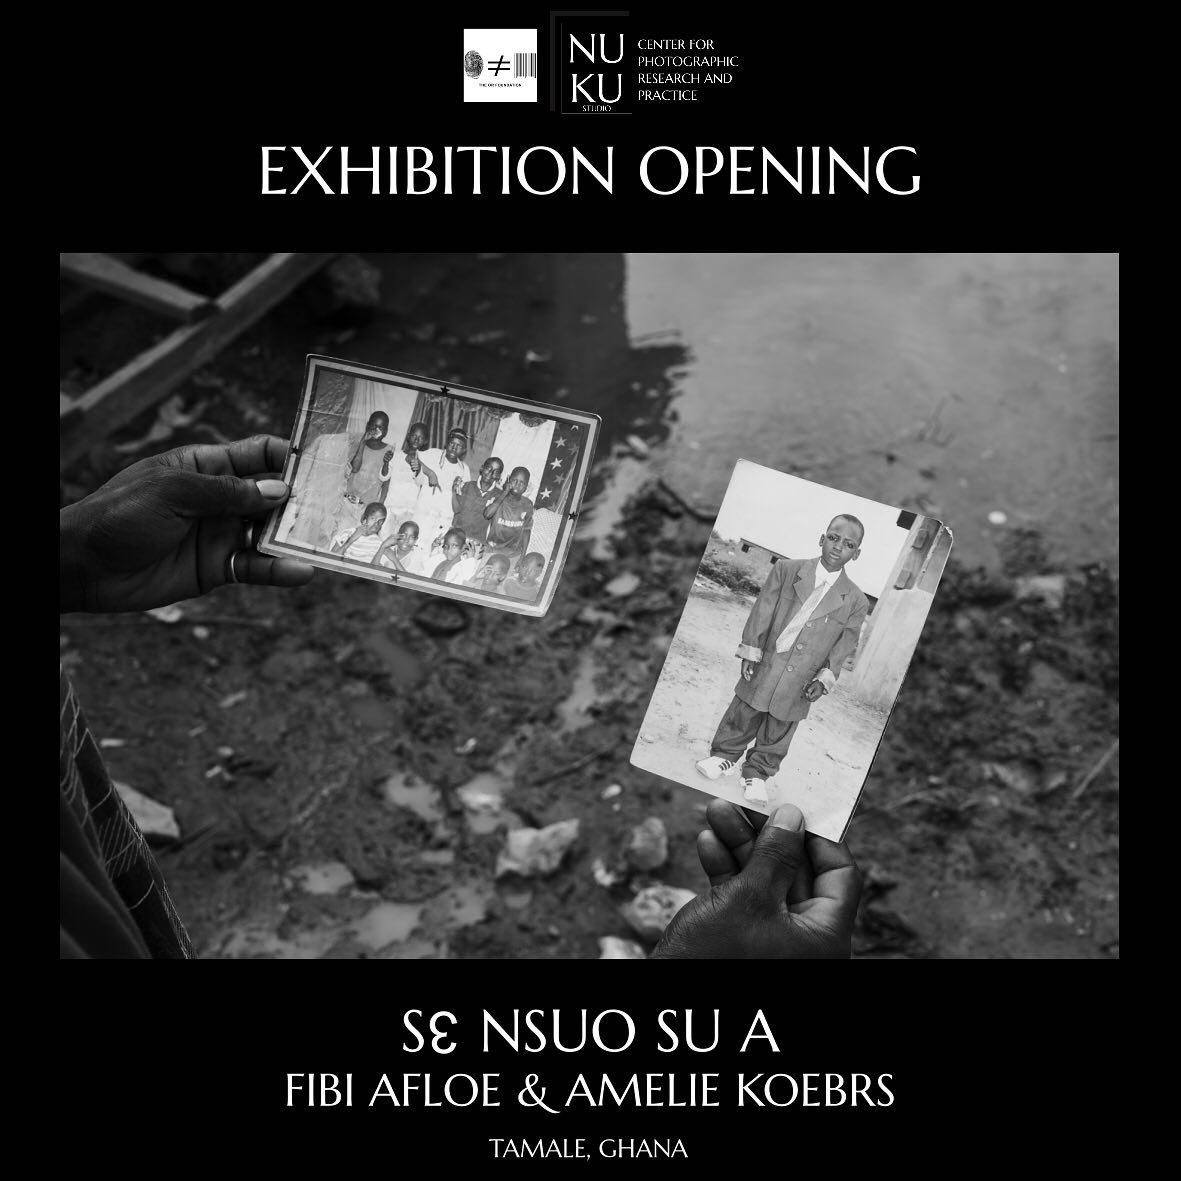 A little less than 2 weeks until Nuku Studio presents &ldquo;Sɛ nsuo su a - When water cries&rdquo;, a photo exhibition by Fibi Afloe ( @storiesfromnima) and Amelie Koerbs (@ameliekoerbs.photography ). The outdoor exhibition in Nuku Studio`s garden i